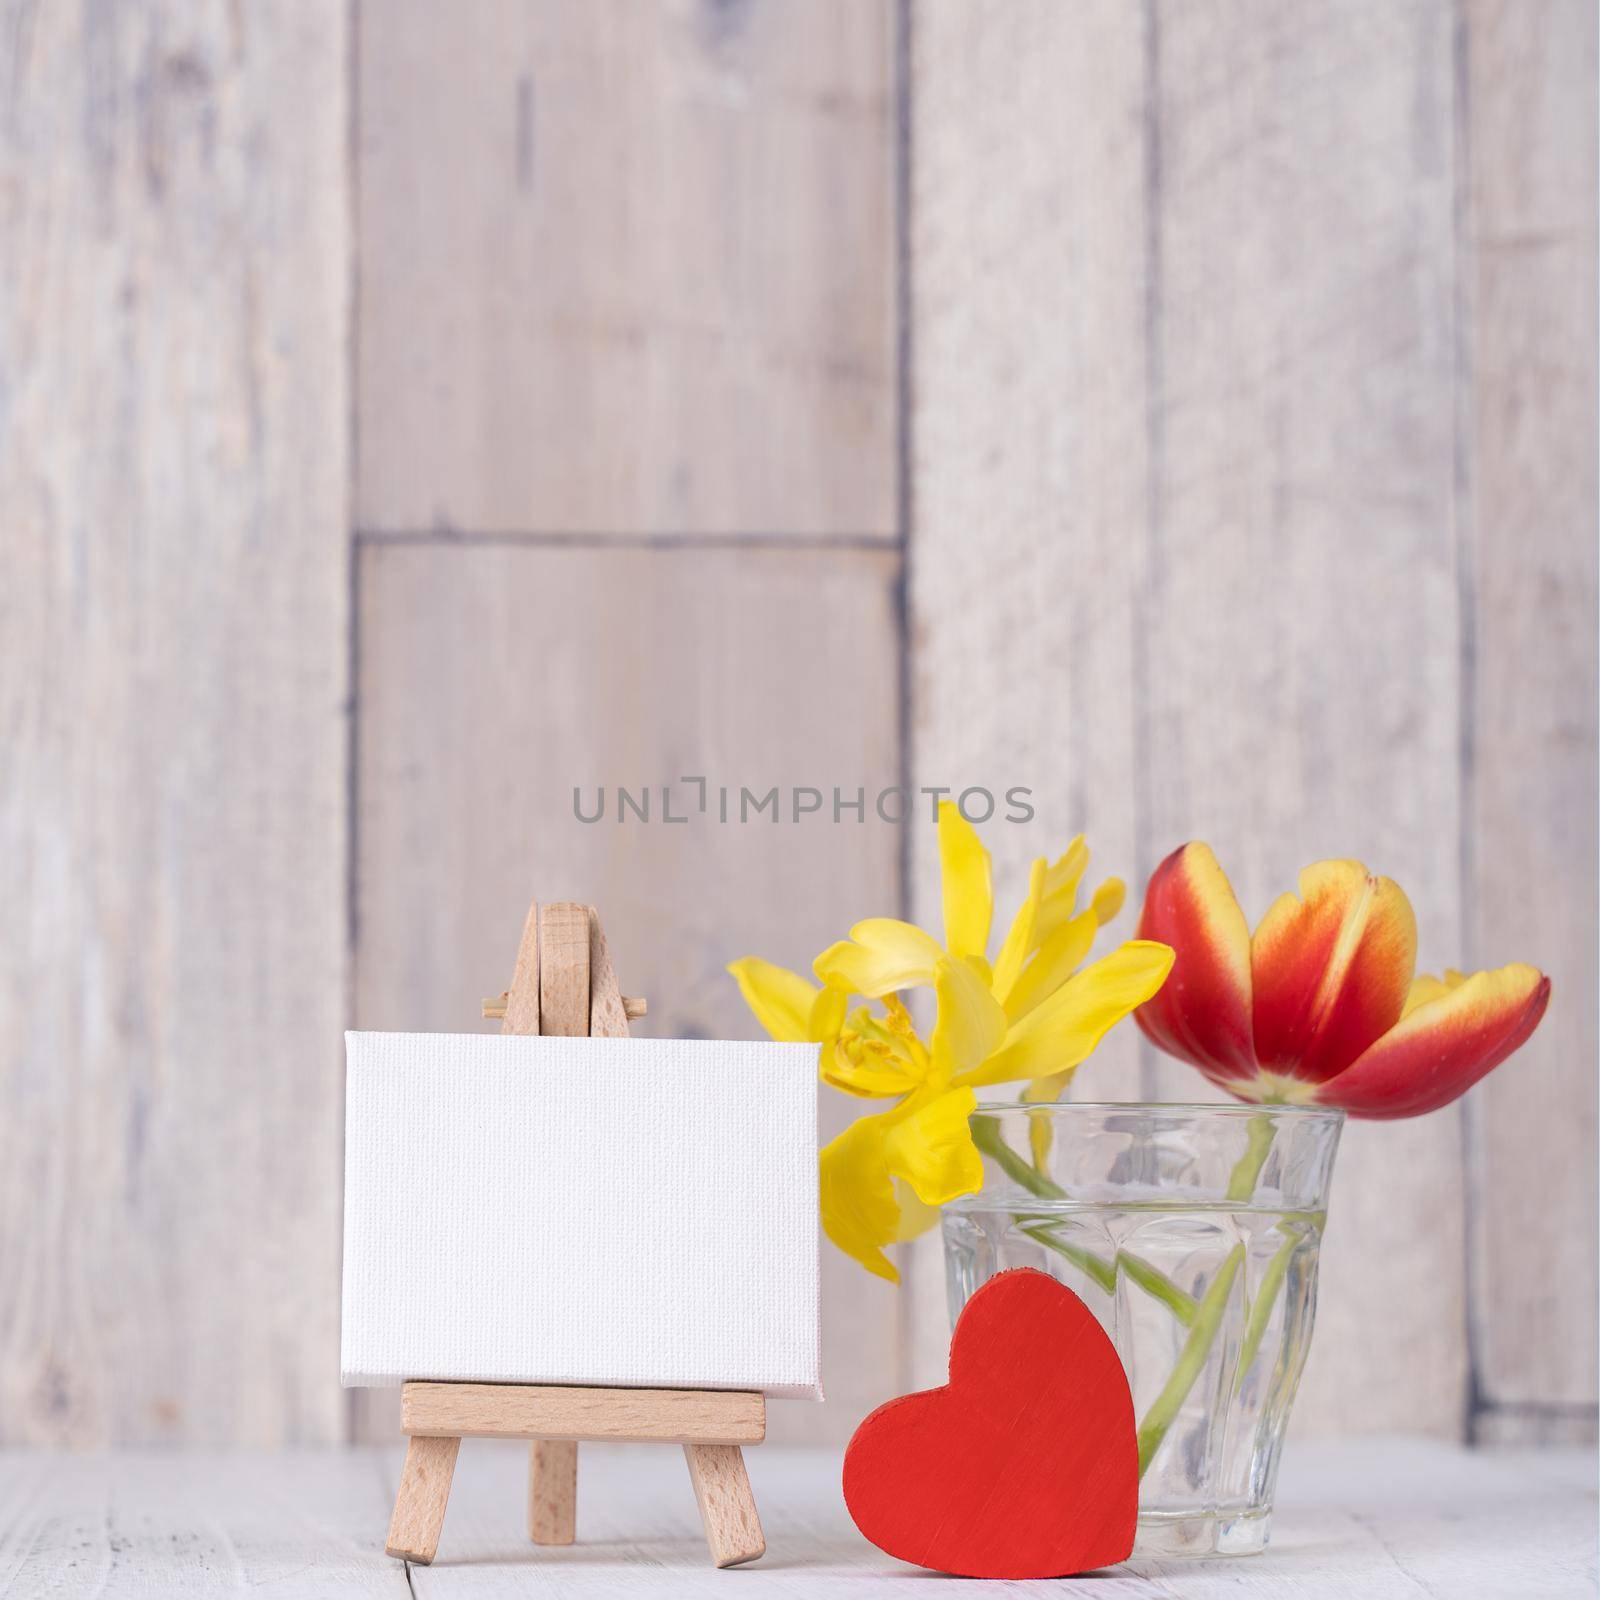 Tulip flower in glass vase with picture frame decor on wooden table background wall at home, close up, Mother's Day design concept. by ROMIXIMAGE